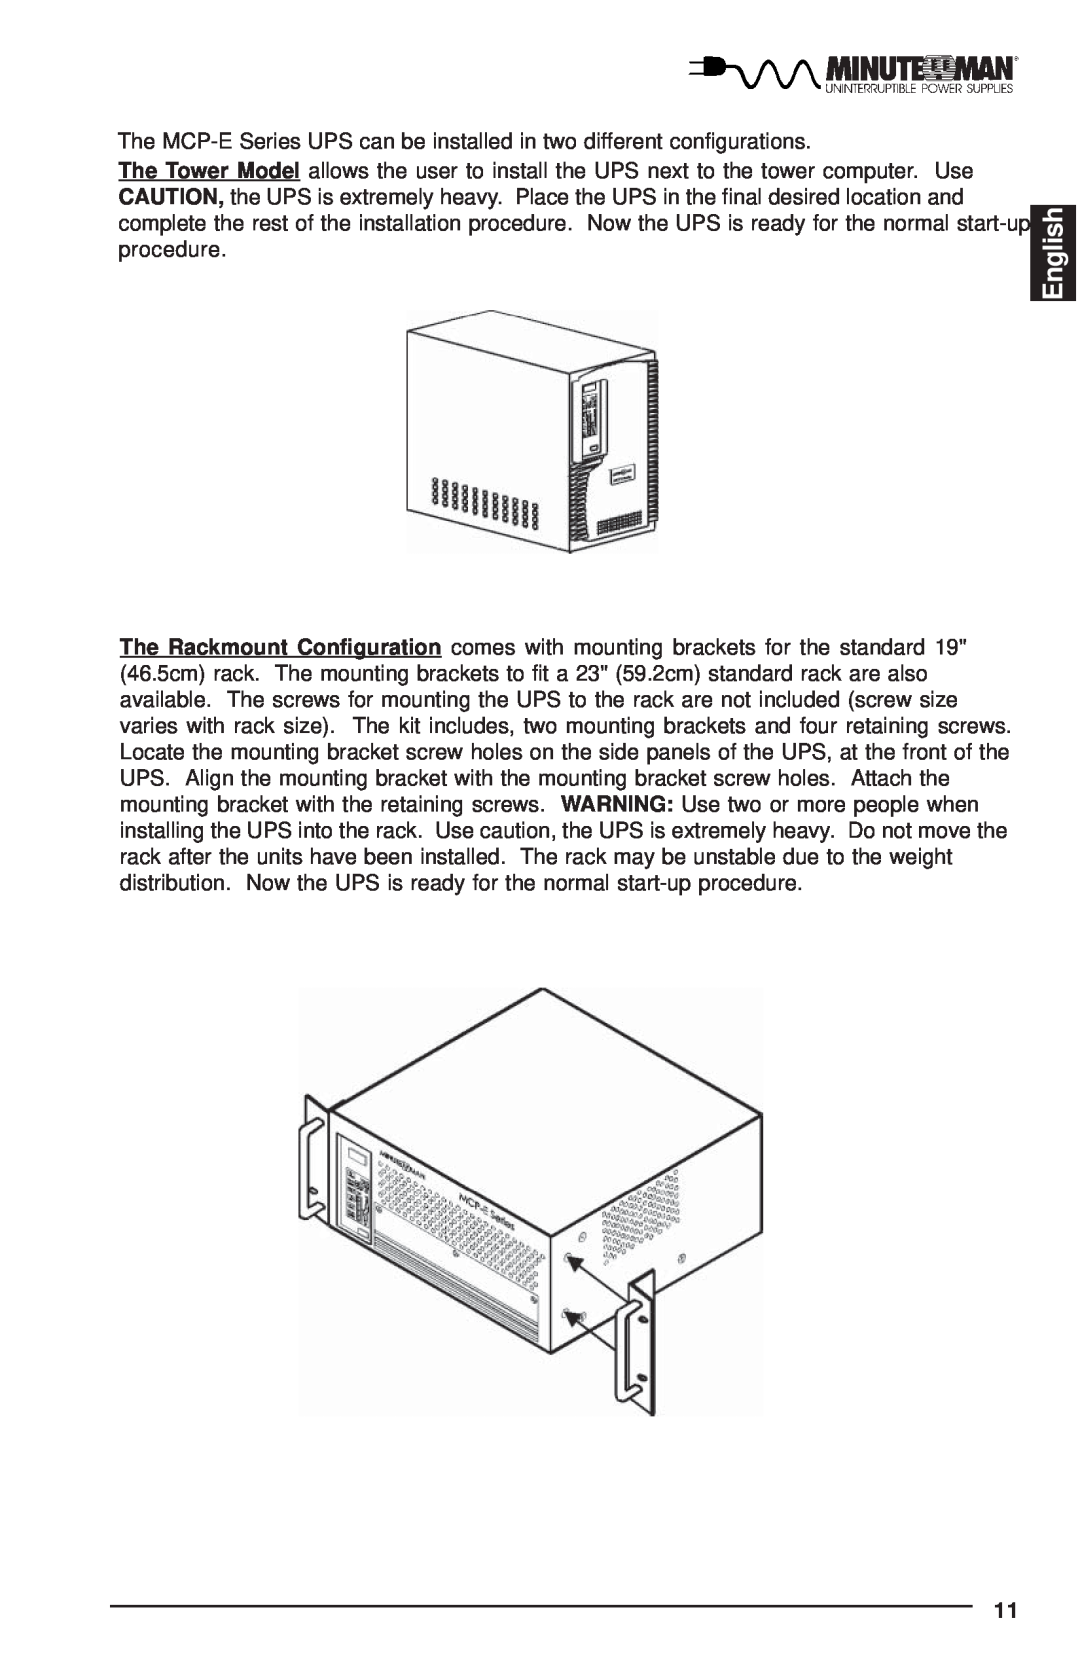 Minuteman UPS user manual English, The MCP-E Series UPS can be installed in two different configurations 